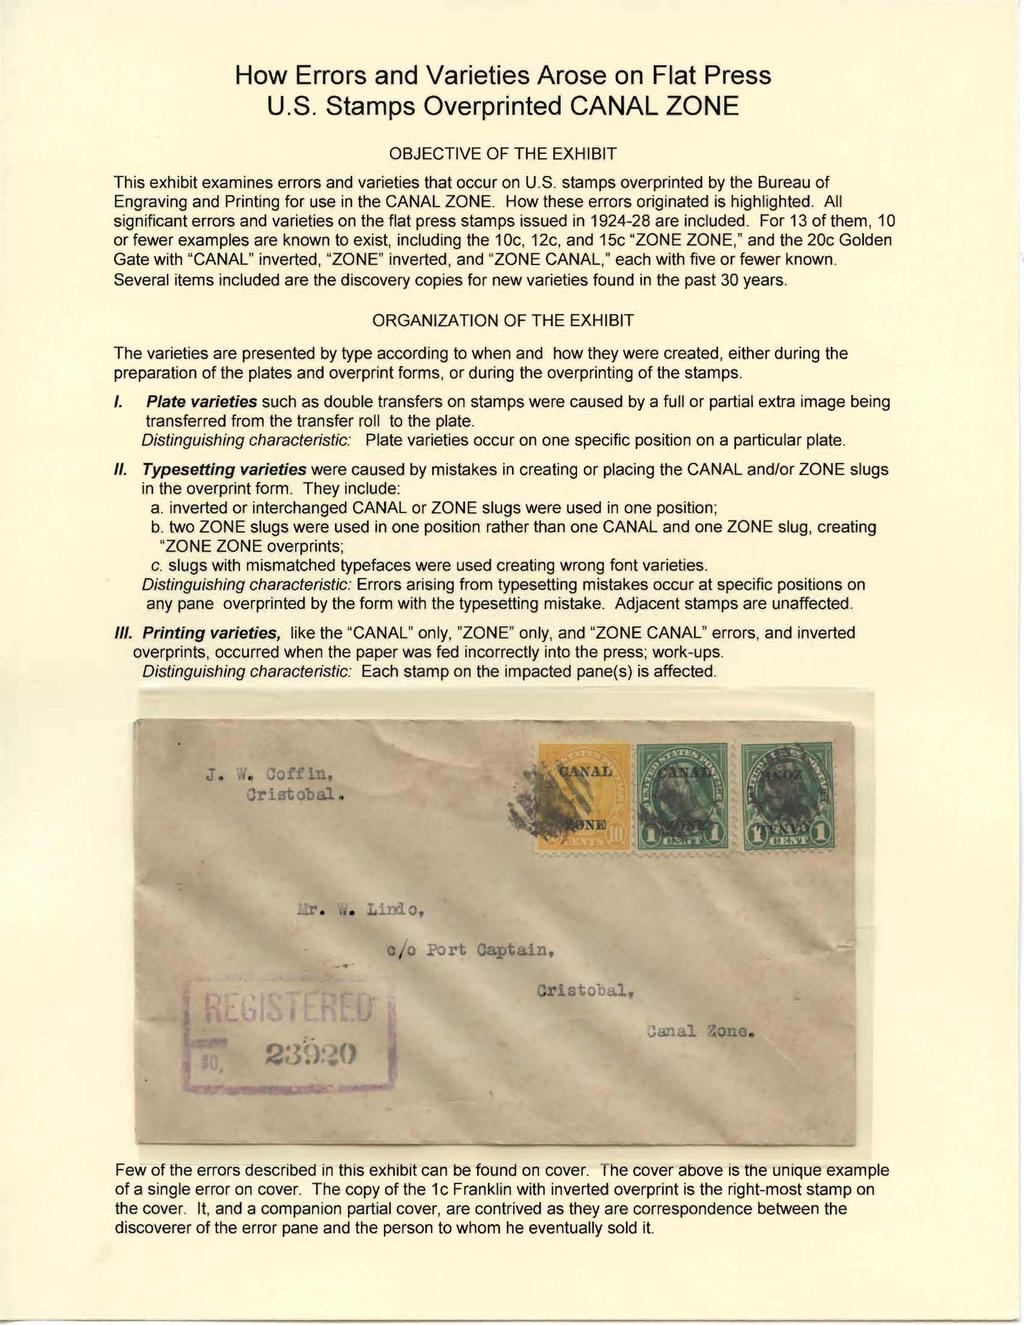 How Errors and Varieties Arose on Flat Press U.S. Stamps Overprinted CANAL ZONE OBJECTIVE OF THE EXHIBIT This exhibit examines errors and varieties that occur on U.S. stamps overprinted by the Bureau of Engraving and Printing for use in the CANAL ZONE.